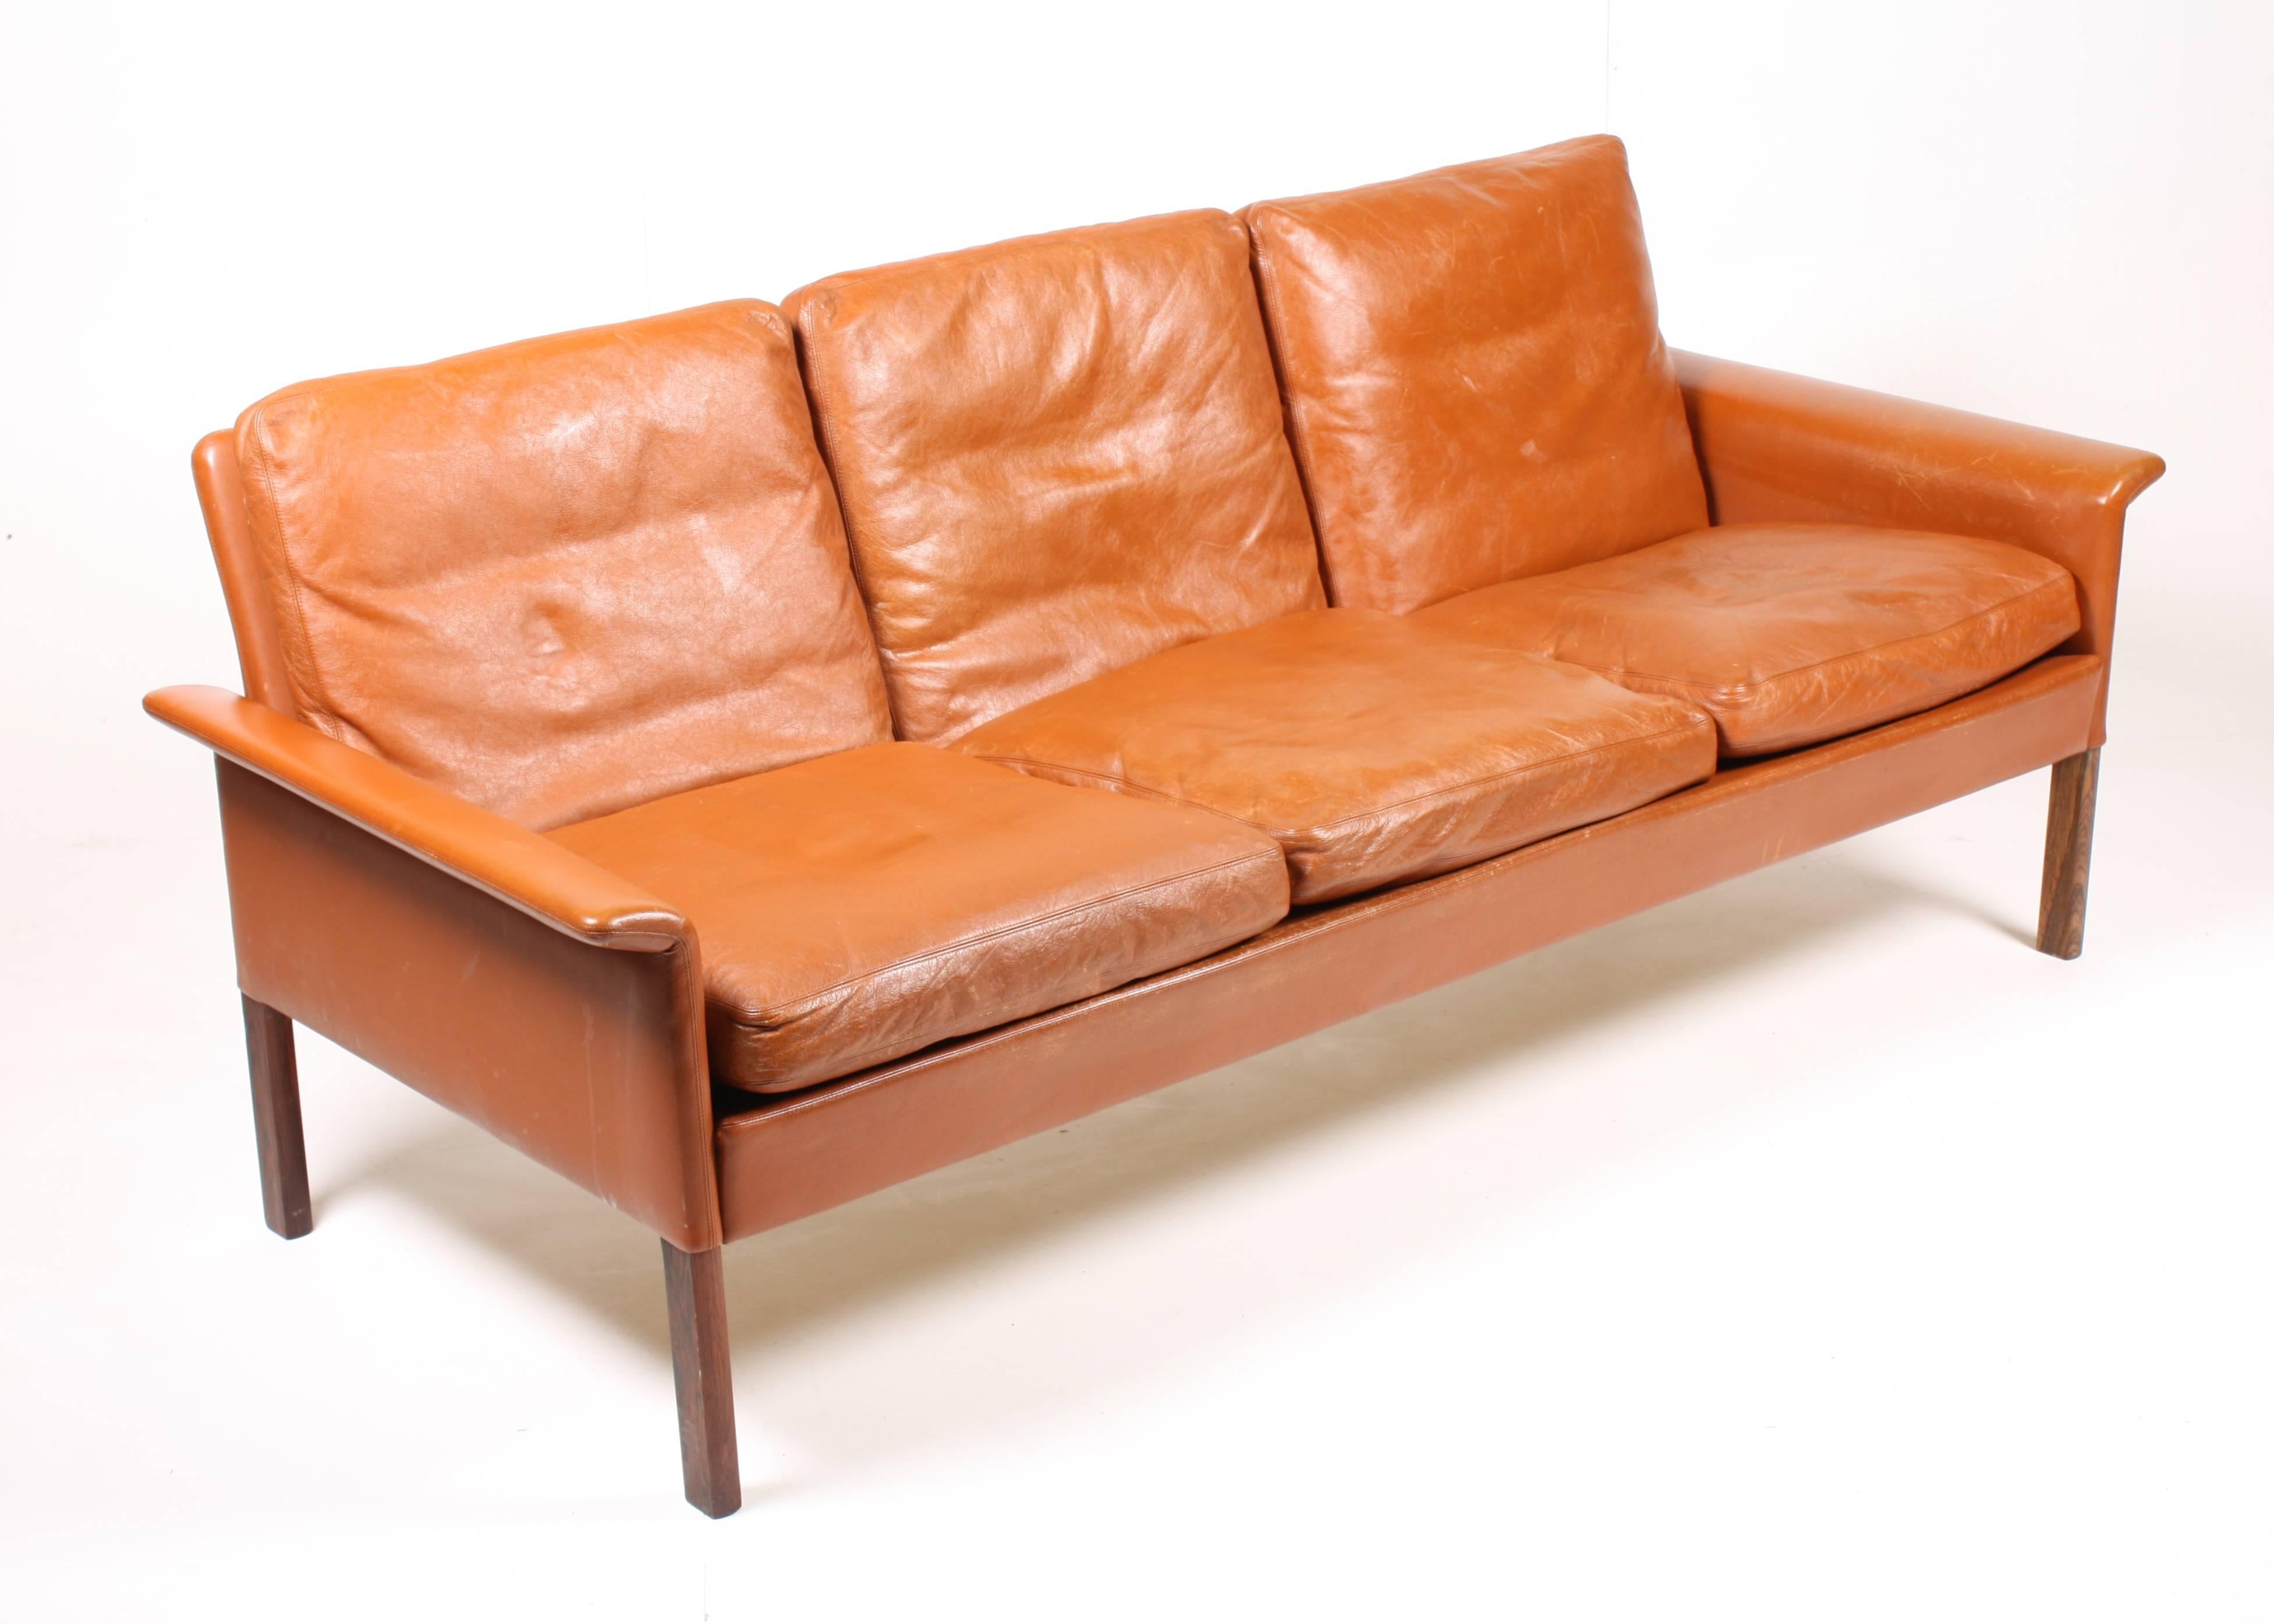 Great looking Danish design sofa in patinated brown leather and rosewood. Designed by Maa. Hans Olsen for CS Furniture in 1969. The sofa is cleaned, waxed and is from a non smoker home. Very nice original condition. Made in Denmark.